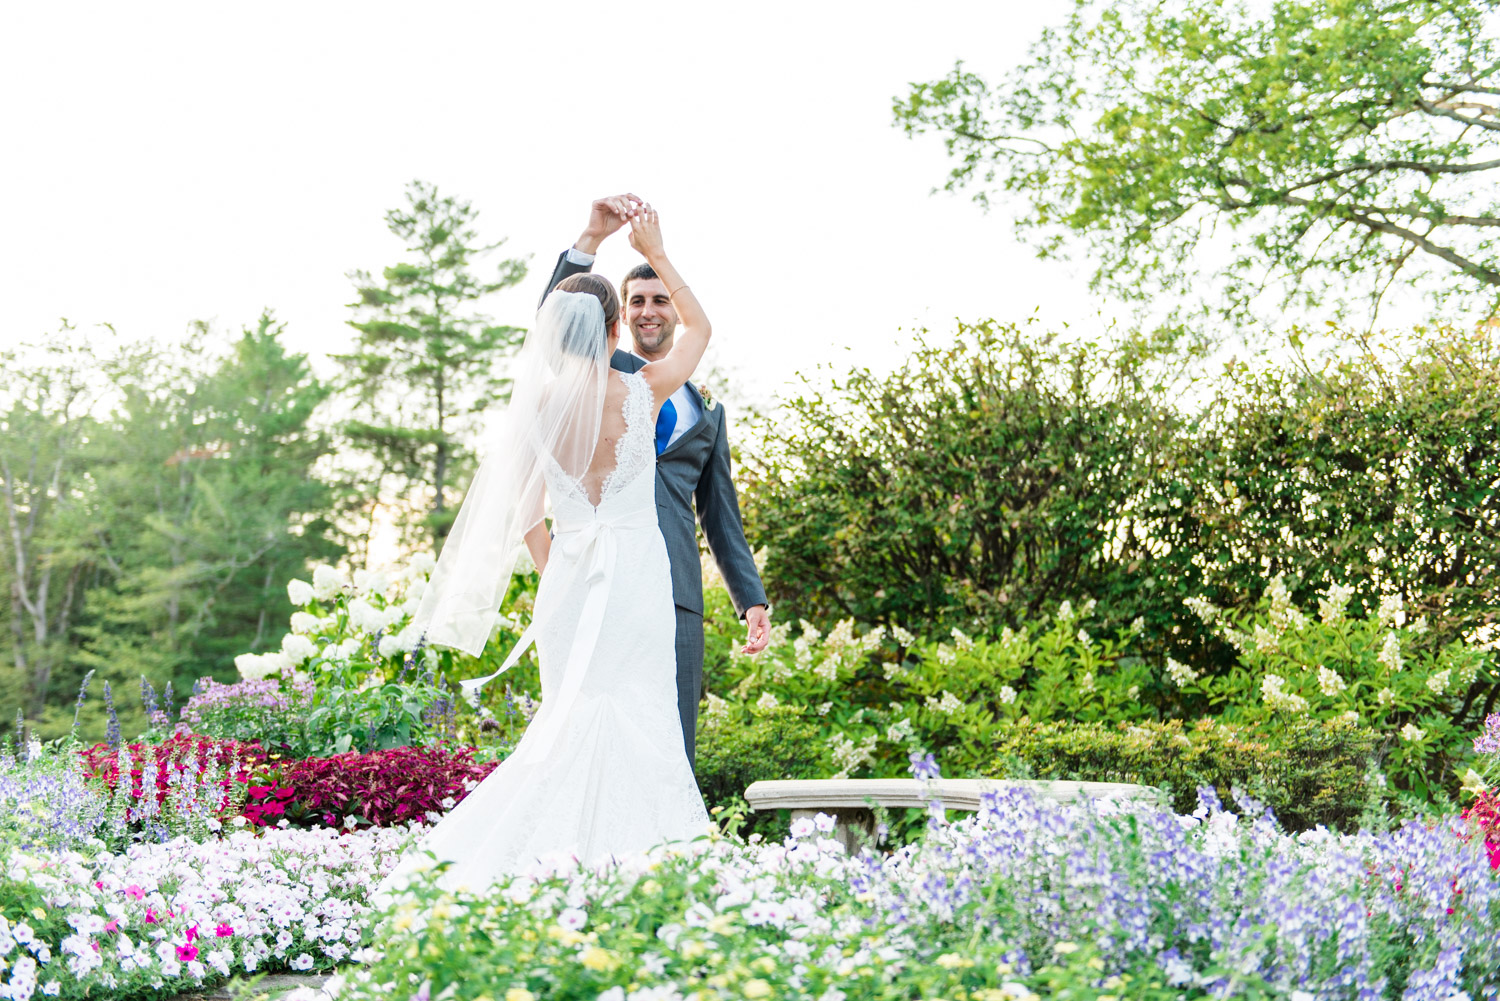 Why You Need Self-Care To Have The Wedding Day Of Your Dreams | Lorna Stell Photo | Boston MA